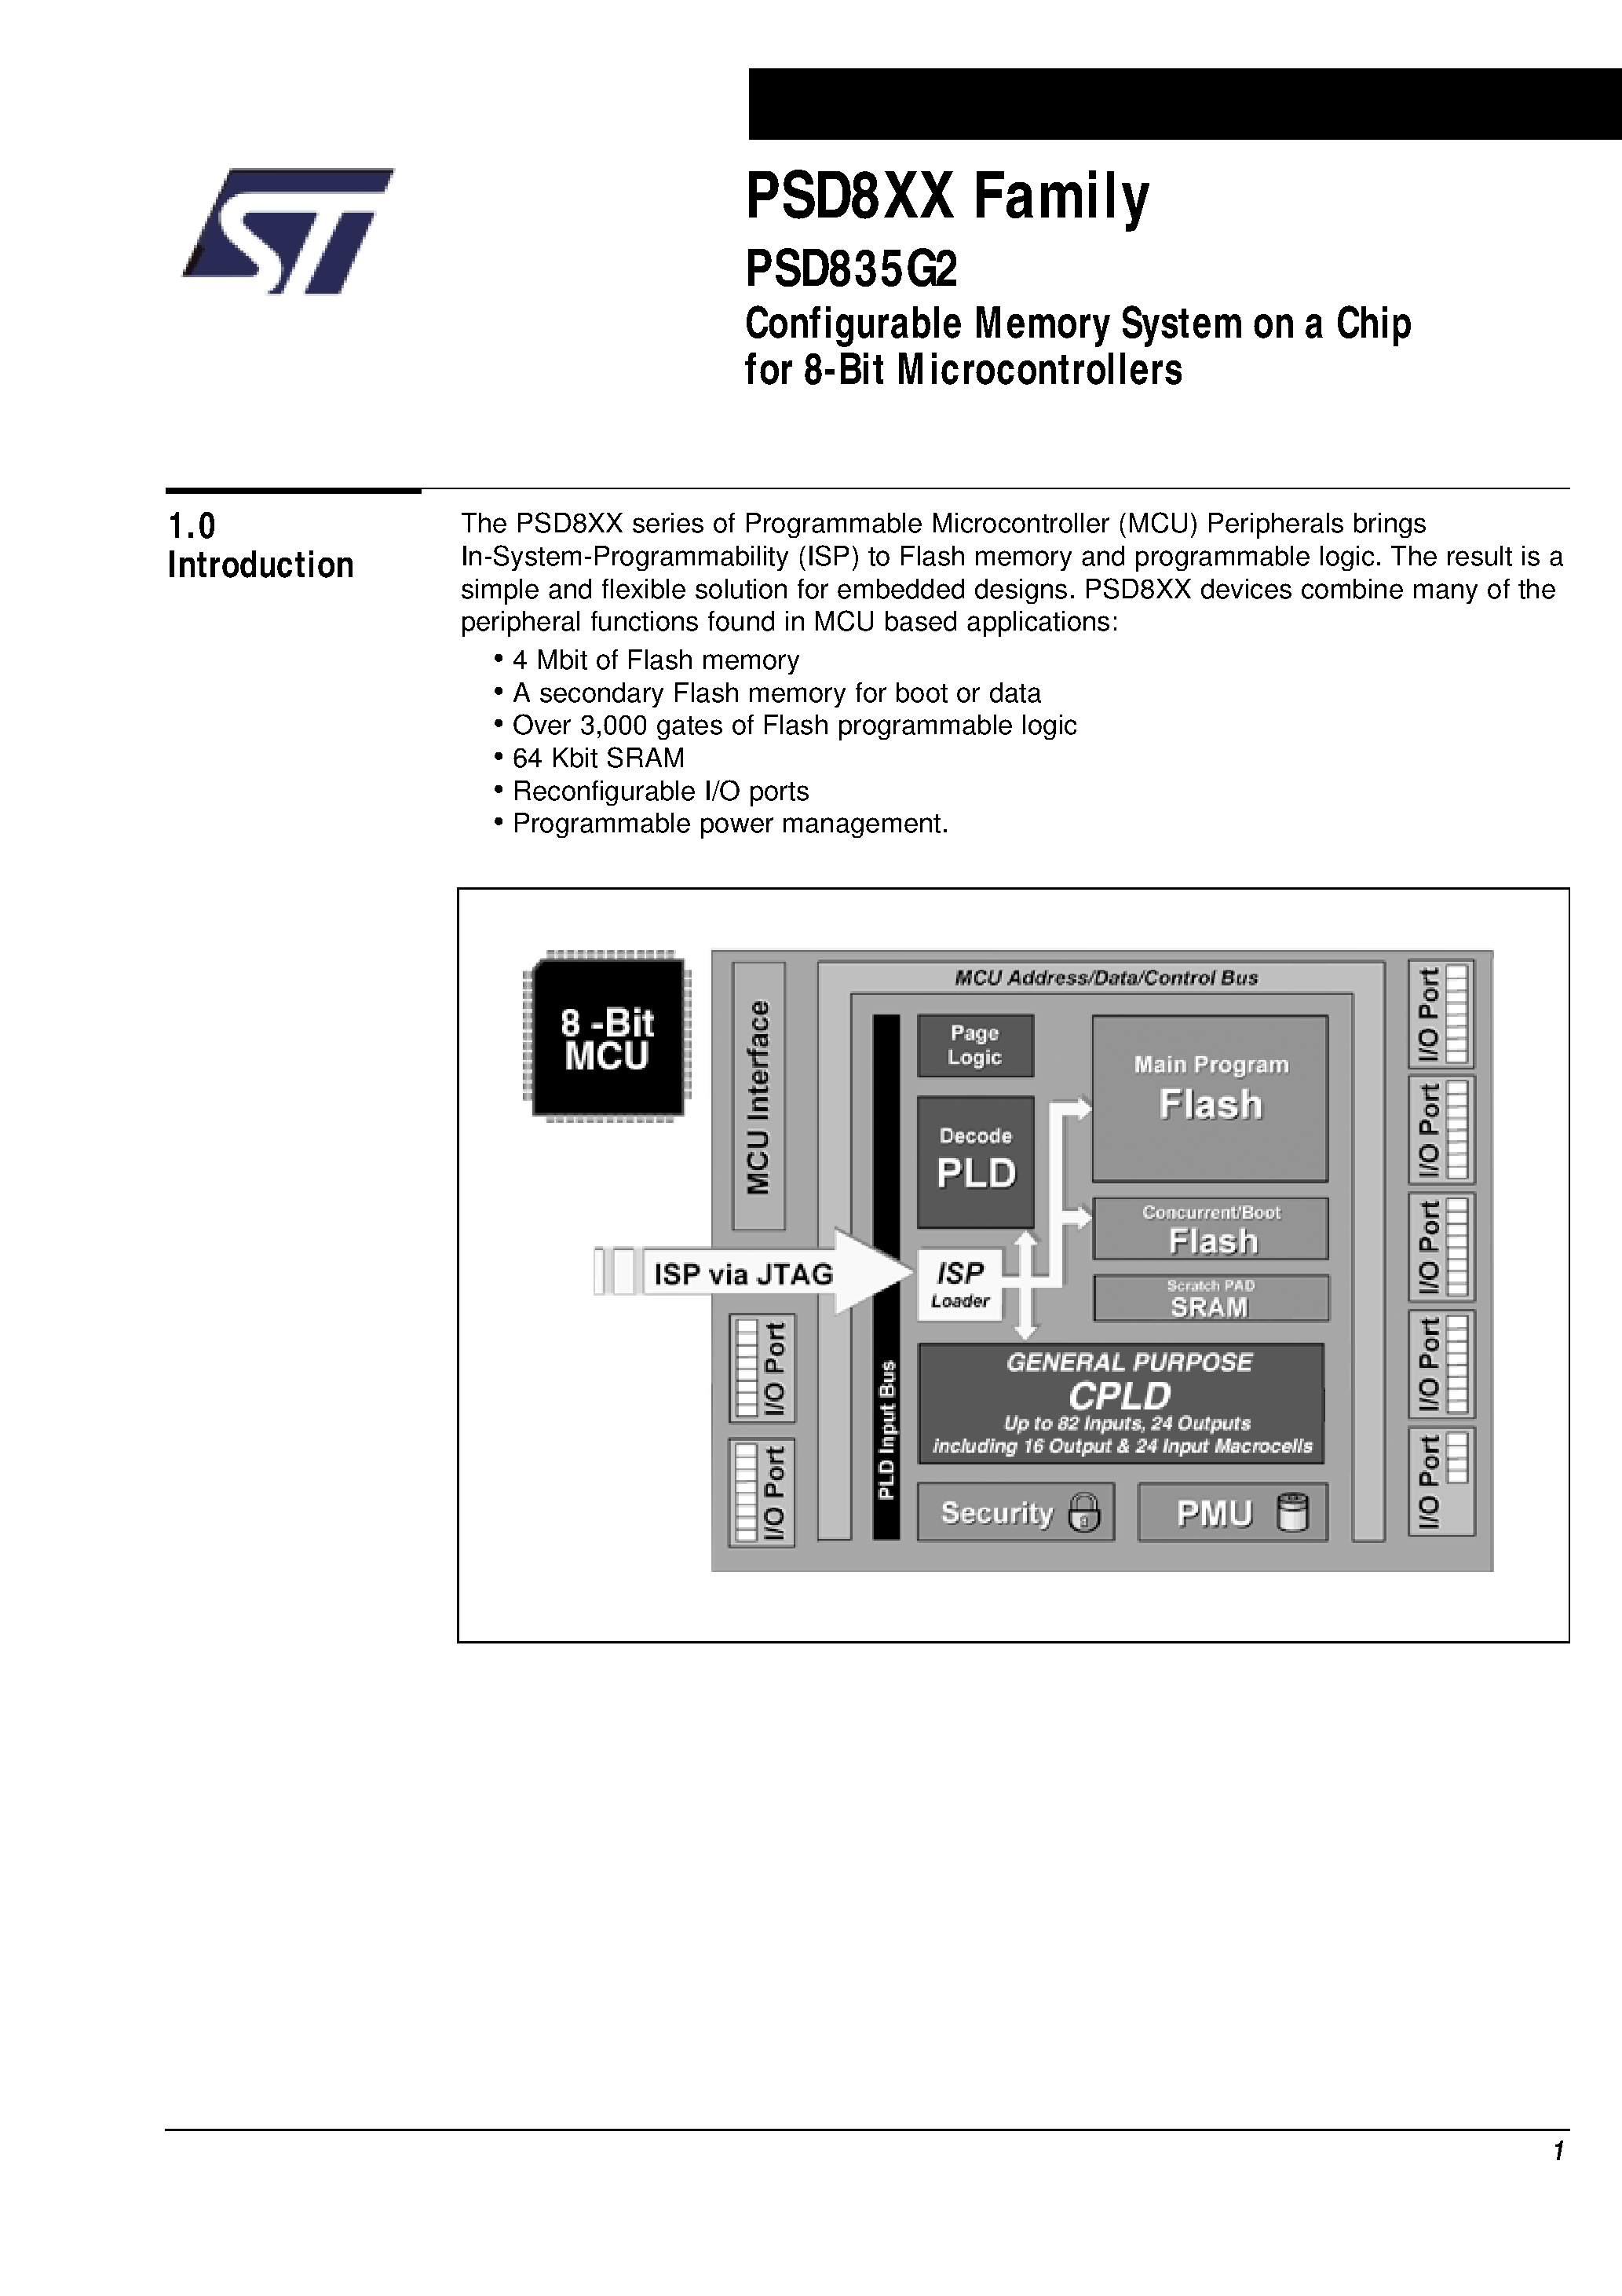 Datasheet PSD835F1V-A-20J - Configurable Memory System on a Chip for 8-Bit Microcontrollers page 2